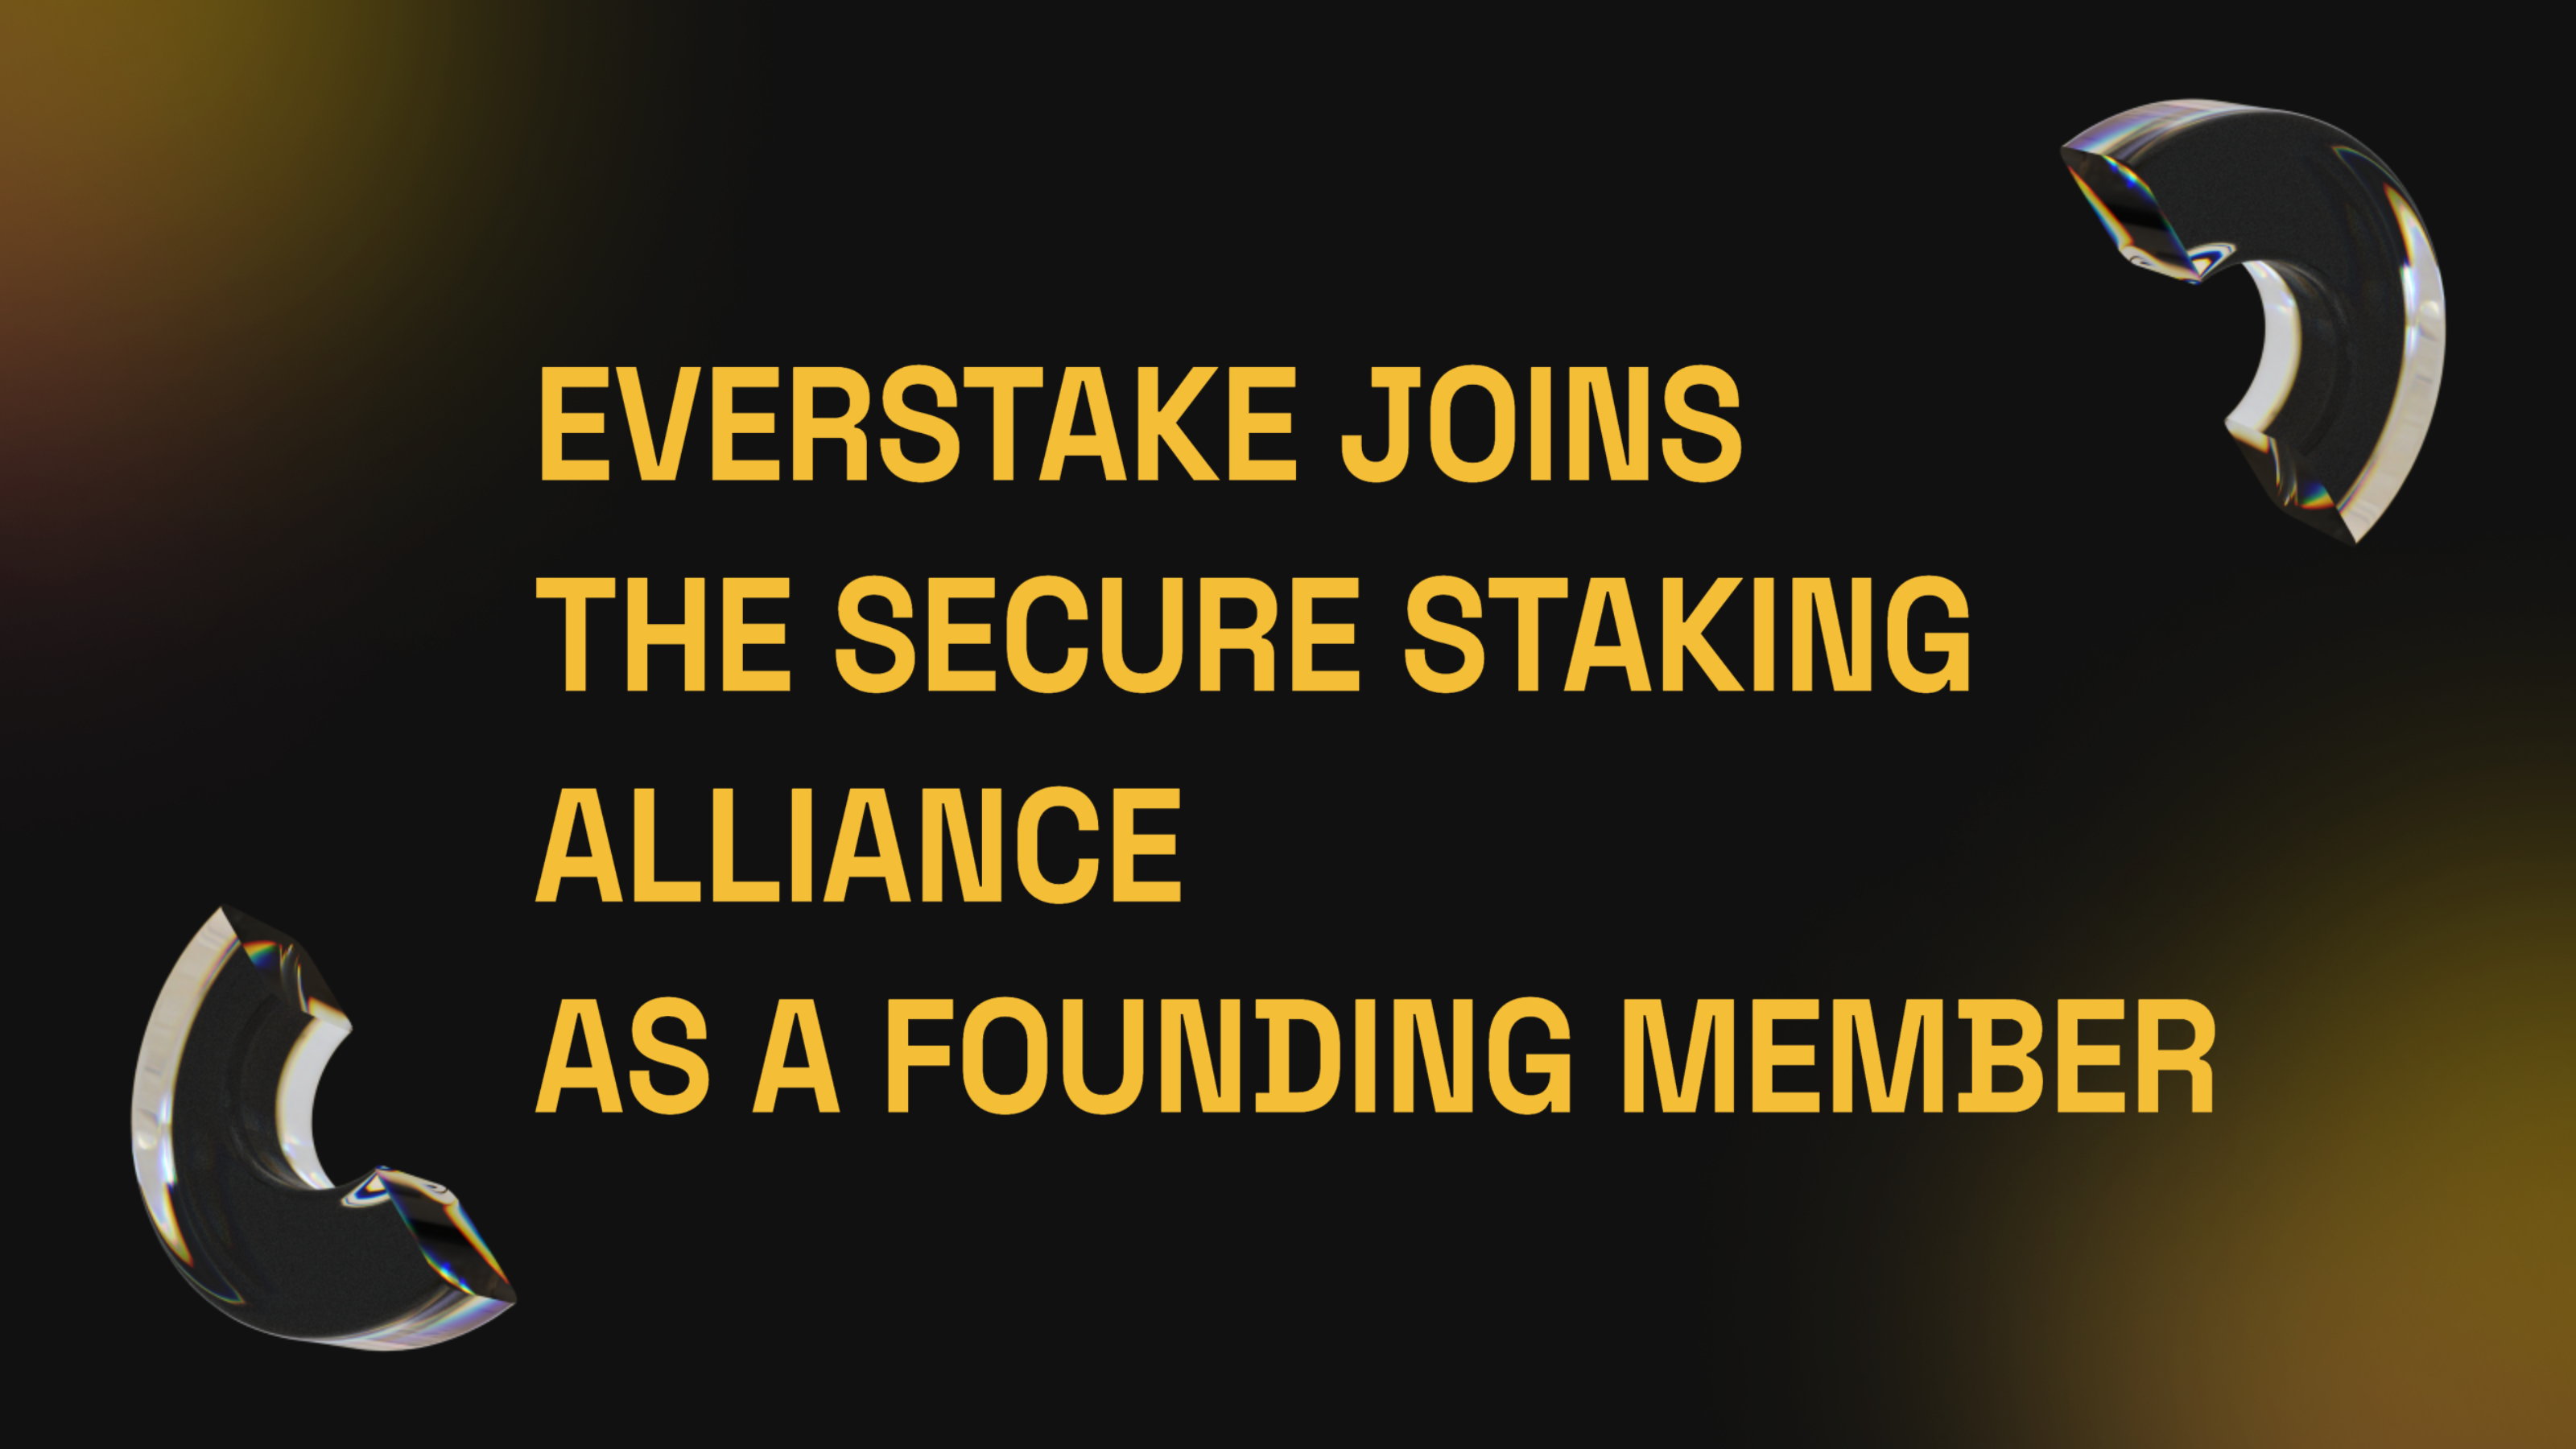 Everstake Joins the Secure Staking Alliance as a Founding Member